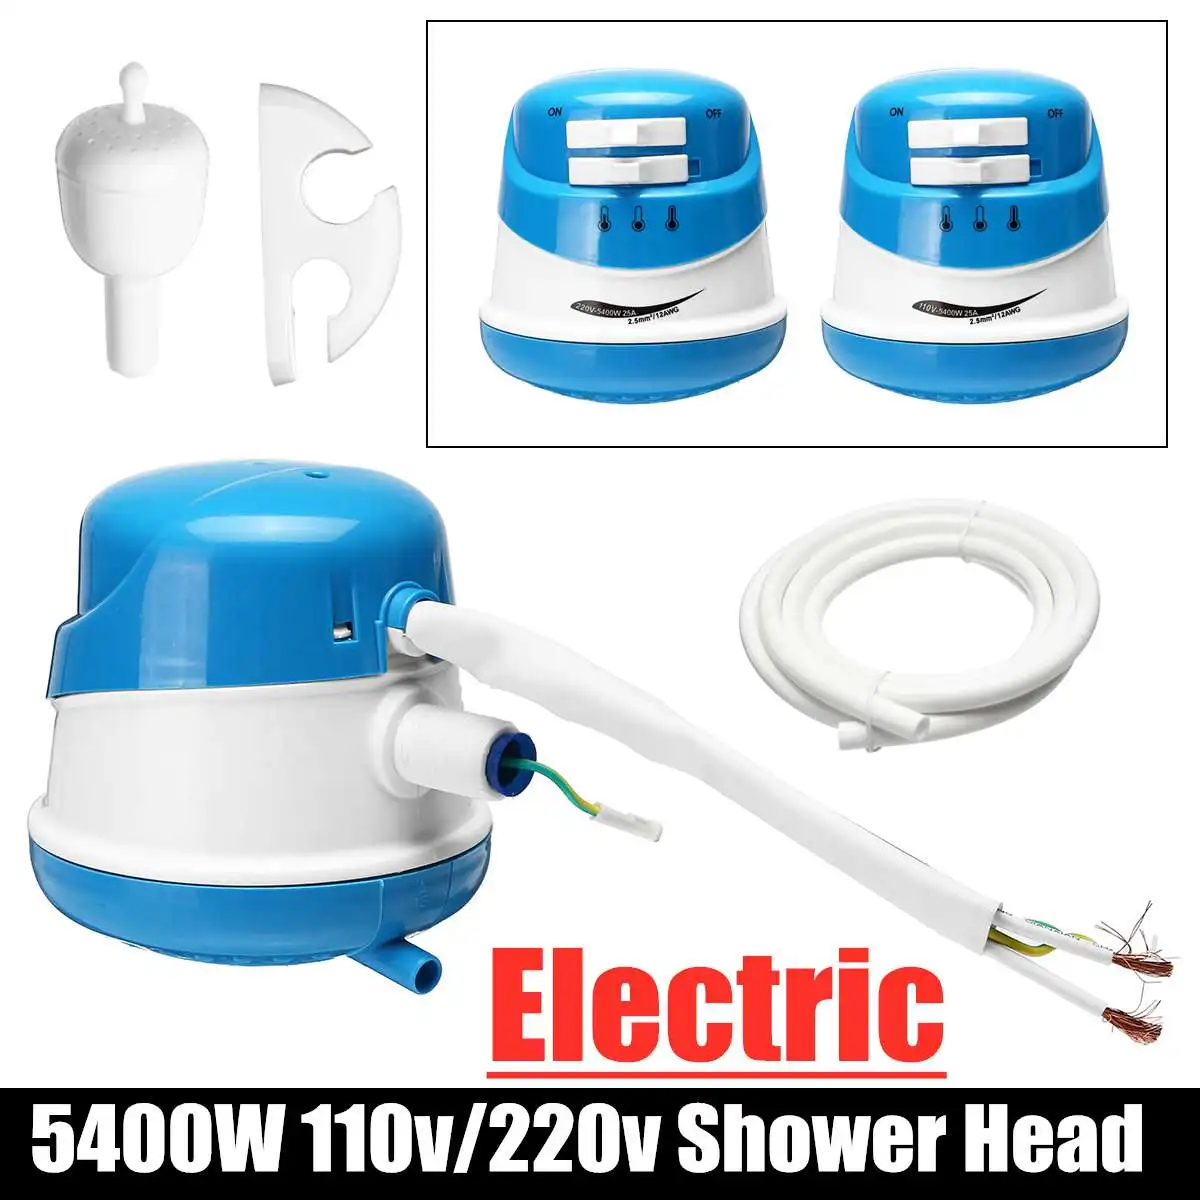 5400W Electric Shower Head 110V Tankless Quick Instant Hot Water Heater Bath US